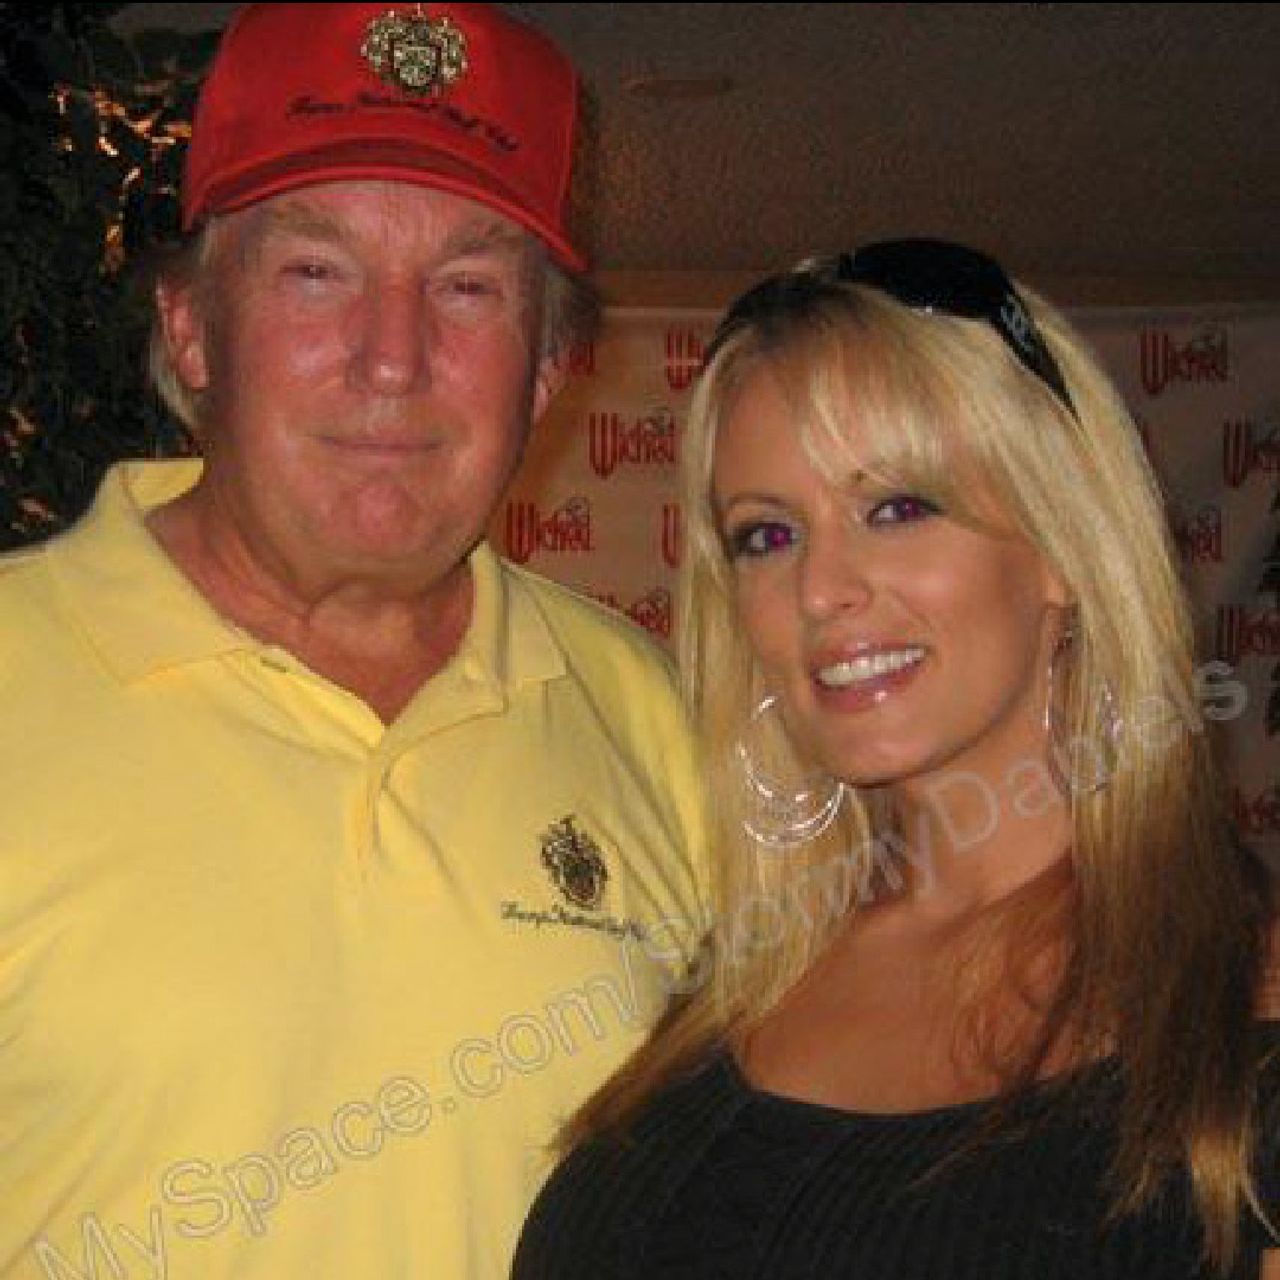 Ex-porn star Stormy Daniels tweets about her sexual affair with Donald Trump